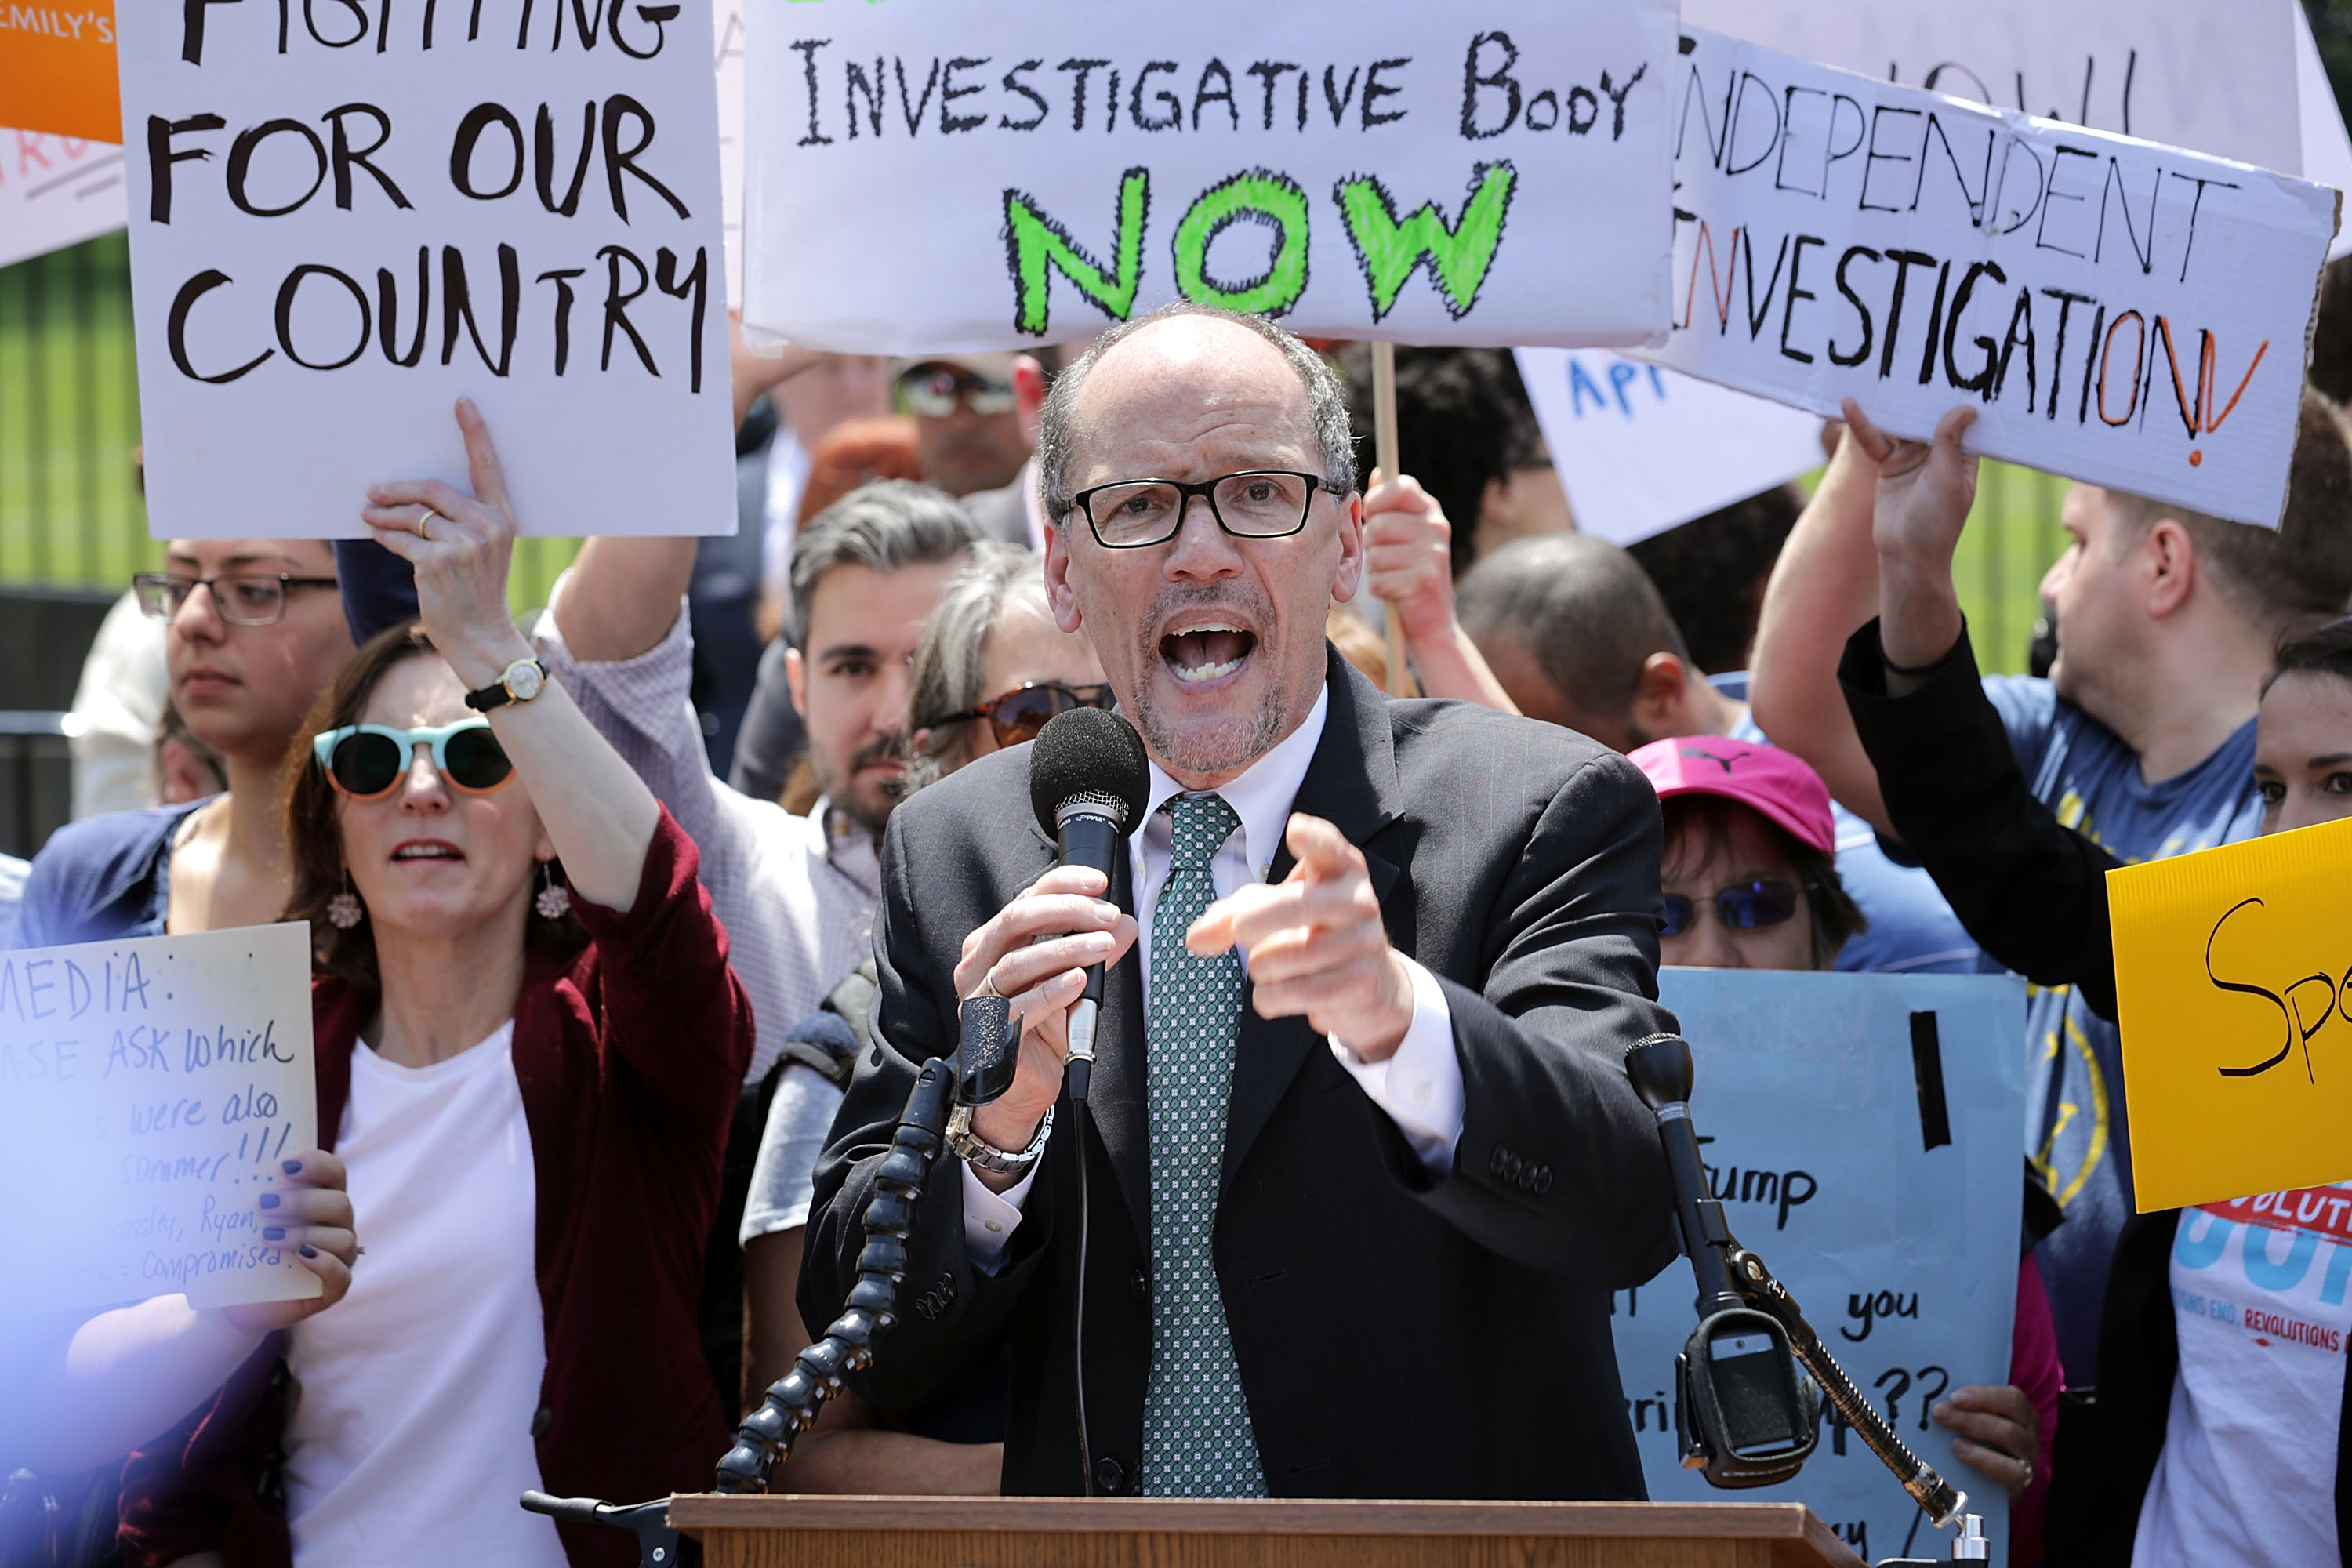 WASHINGTON, DC - MAY 10: Democratic National Party Chirman Tom Perez speaks as about 300 people rally to protest against President Donald Trump's firing of Federal Bureau of Investigation Director James Comey outside the White House May 10, 2017 in Washington, DC. Trump fired Comey a day earlier, calling it the 'Tuesday Night Massacre,' recalling former President Richard Nixon's firing of a independent special prosecutor. (Photo by Chip Somodevilla/Getty Images)